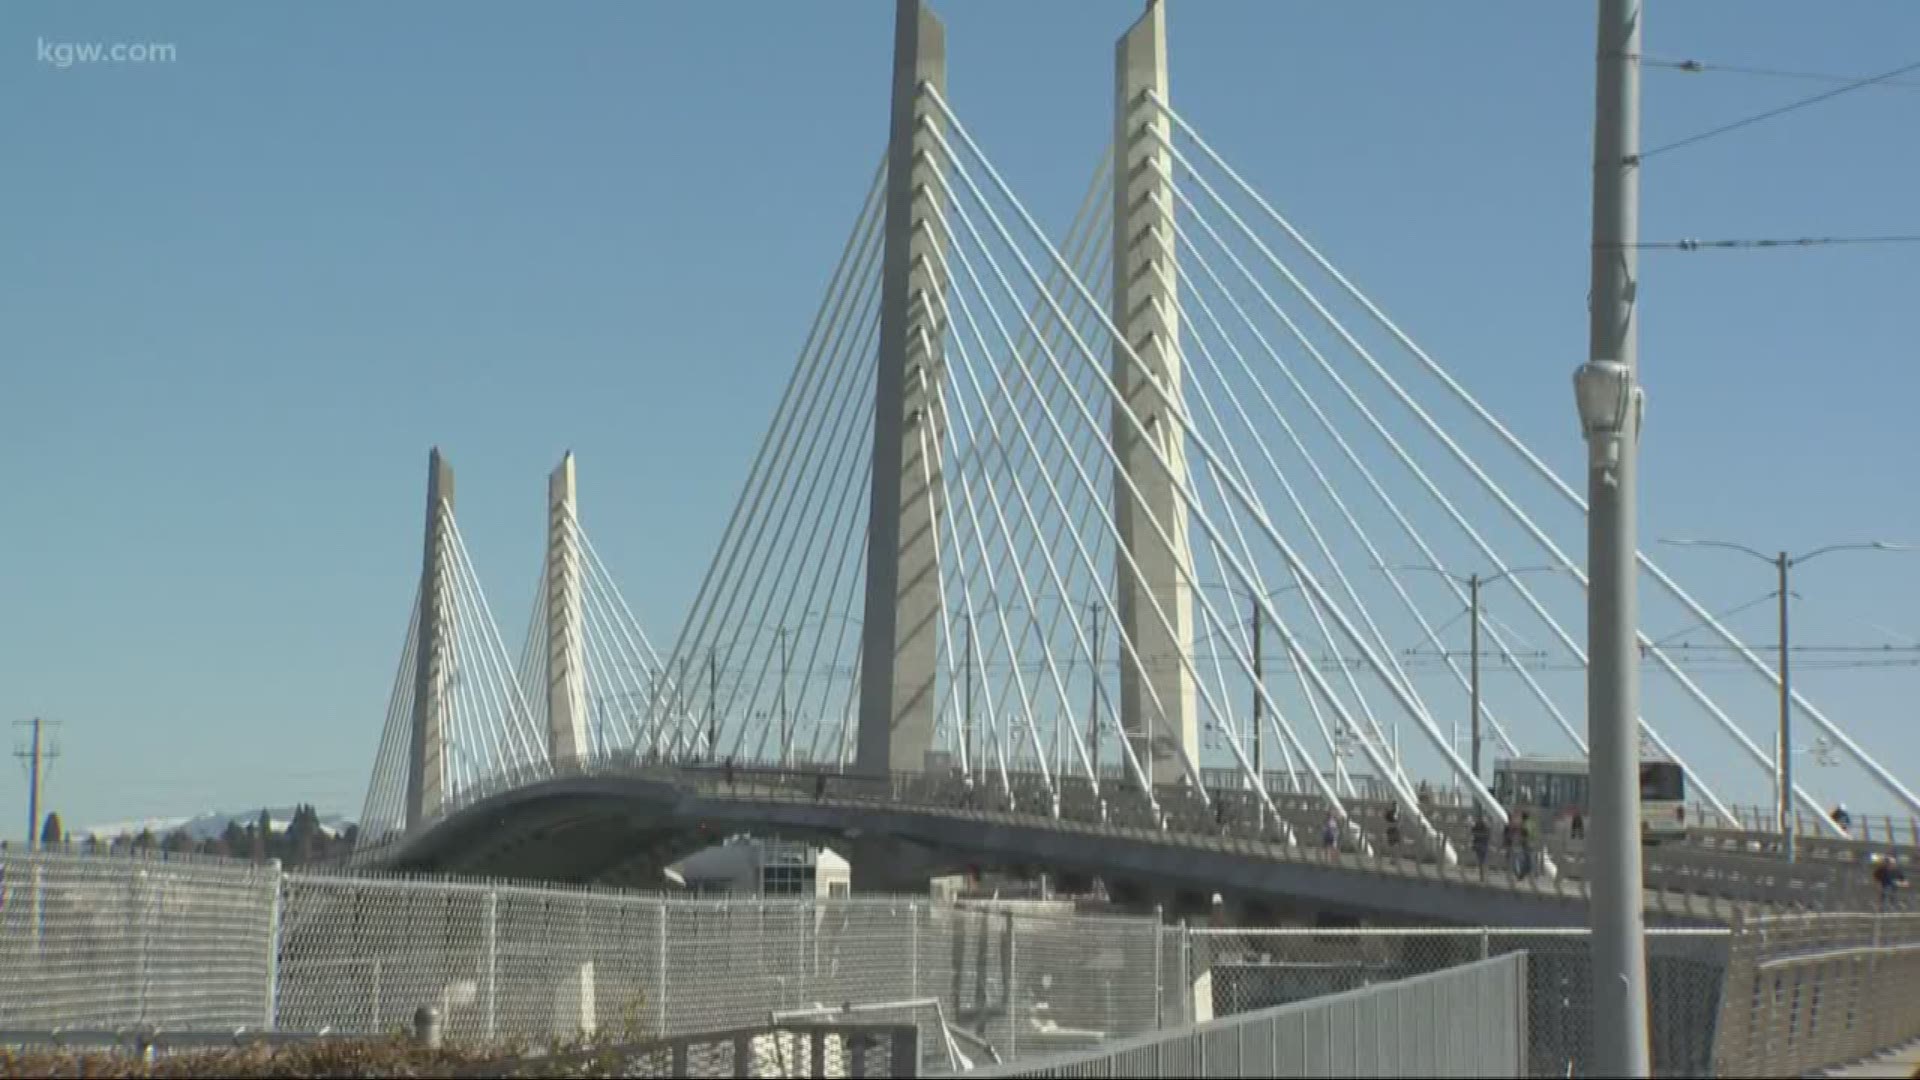 Wind turbines are coming to the Tilikum Crossing.